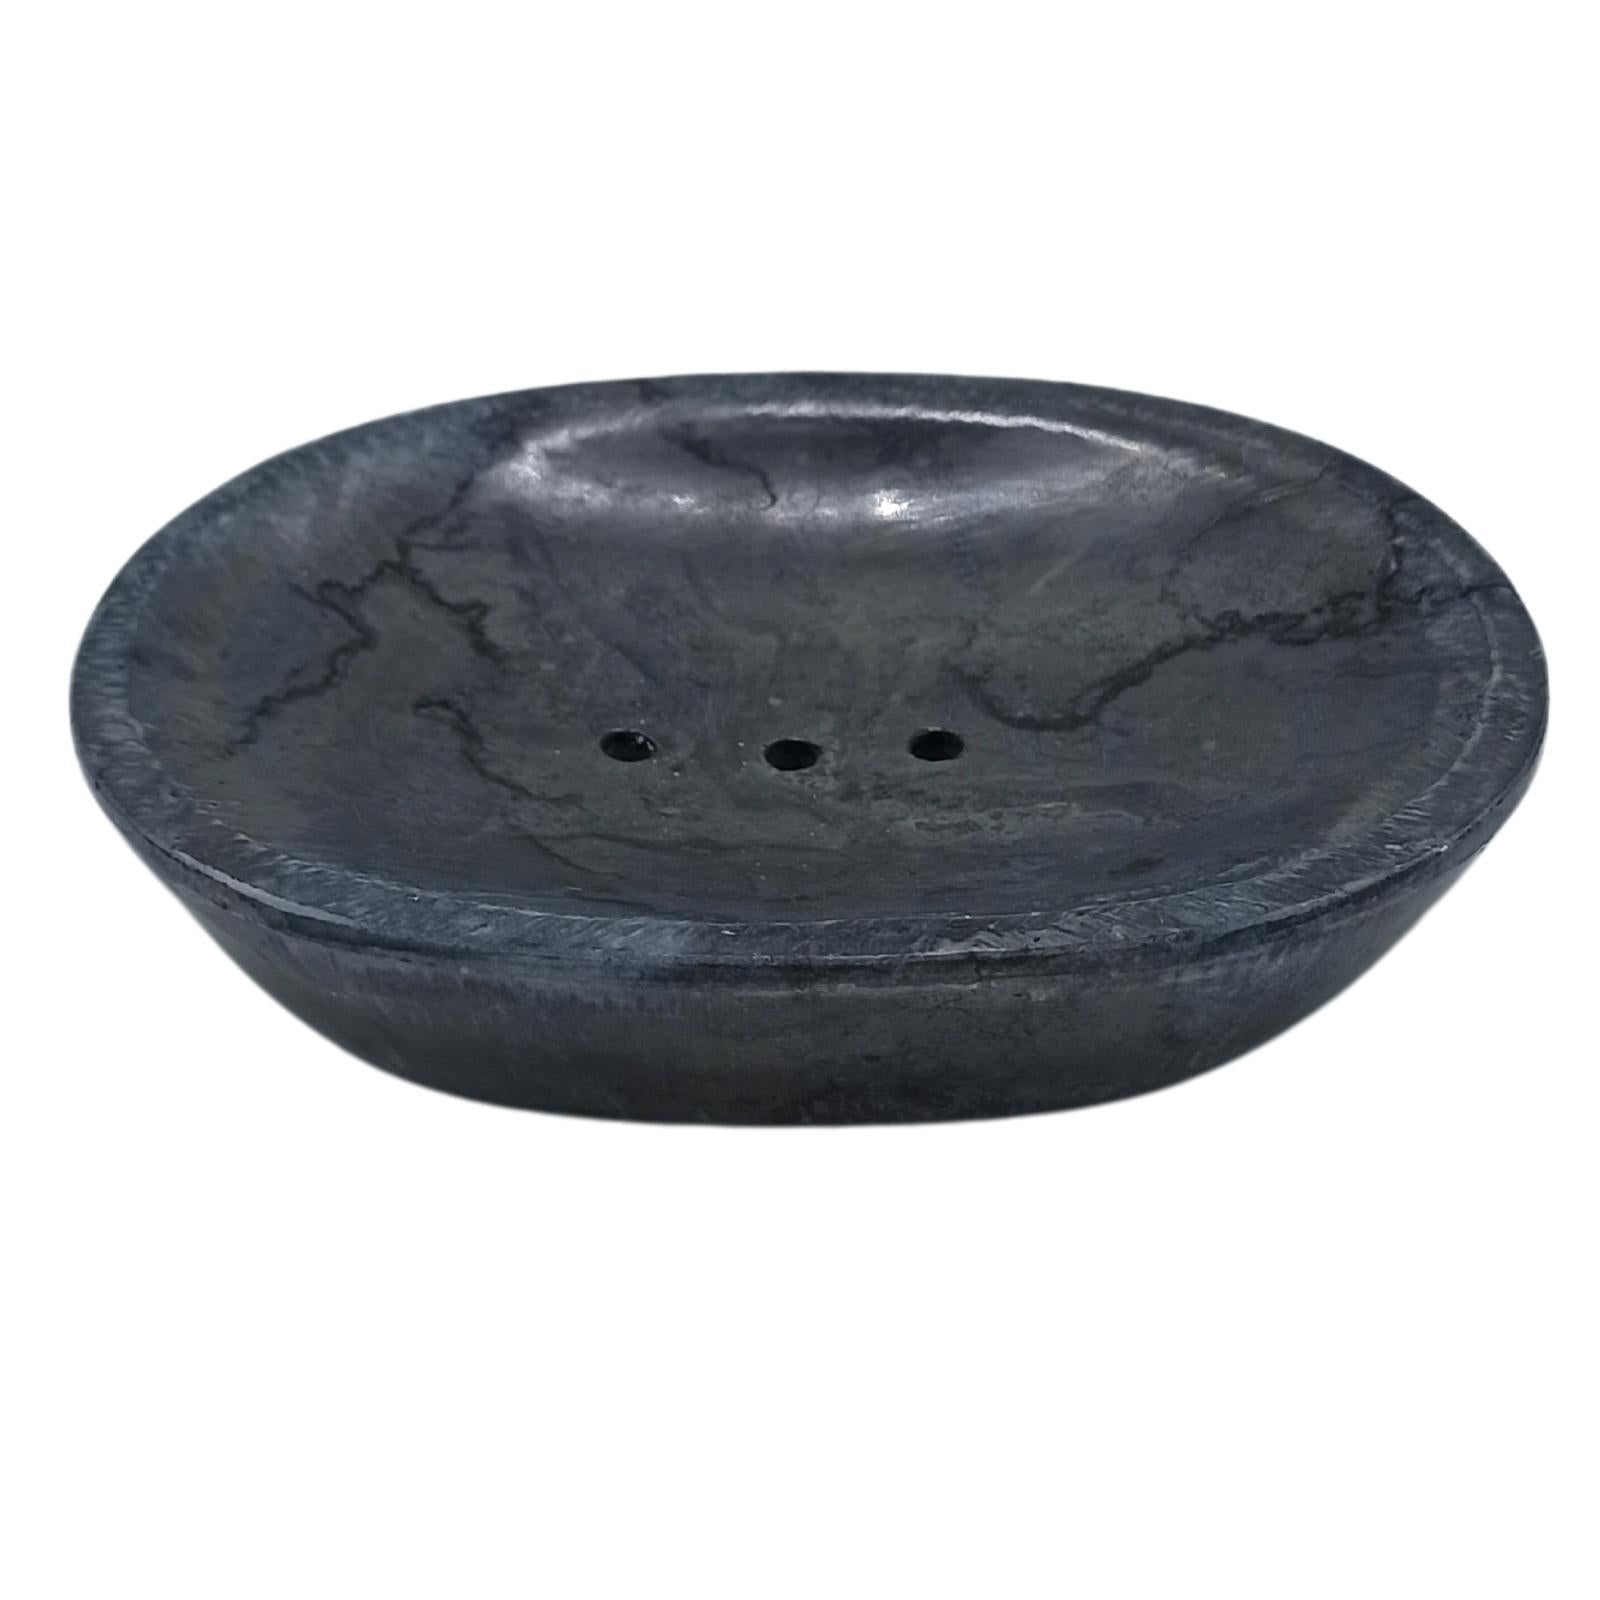 View Classic Oval Black Marble Soap Dish information